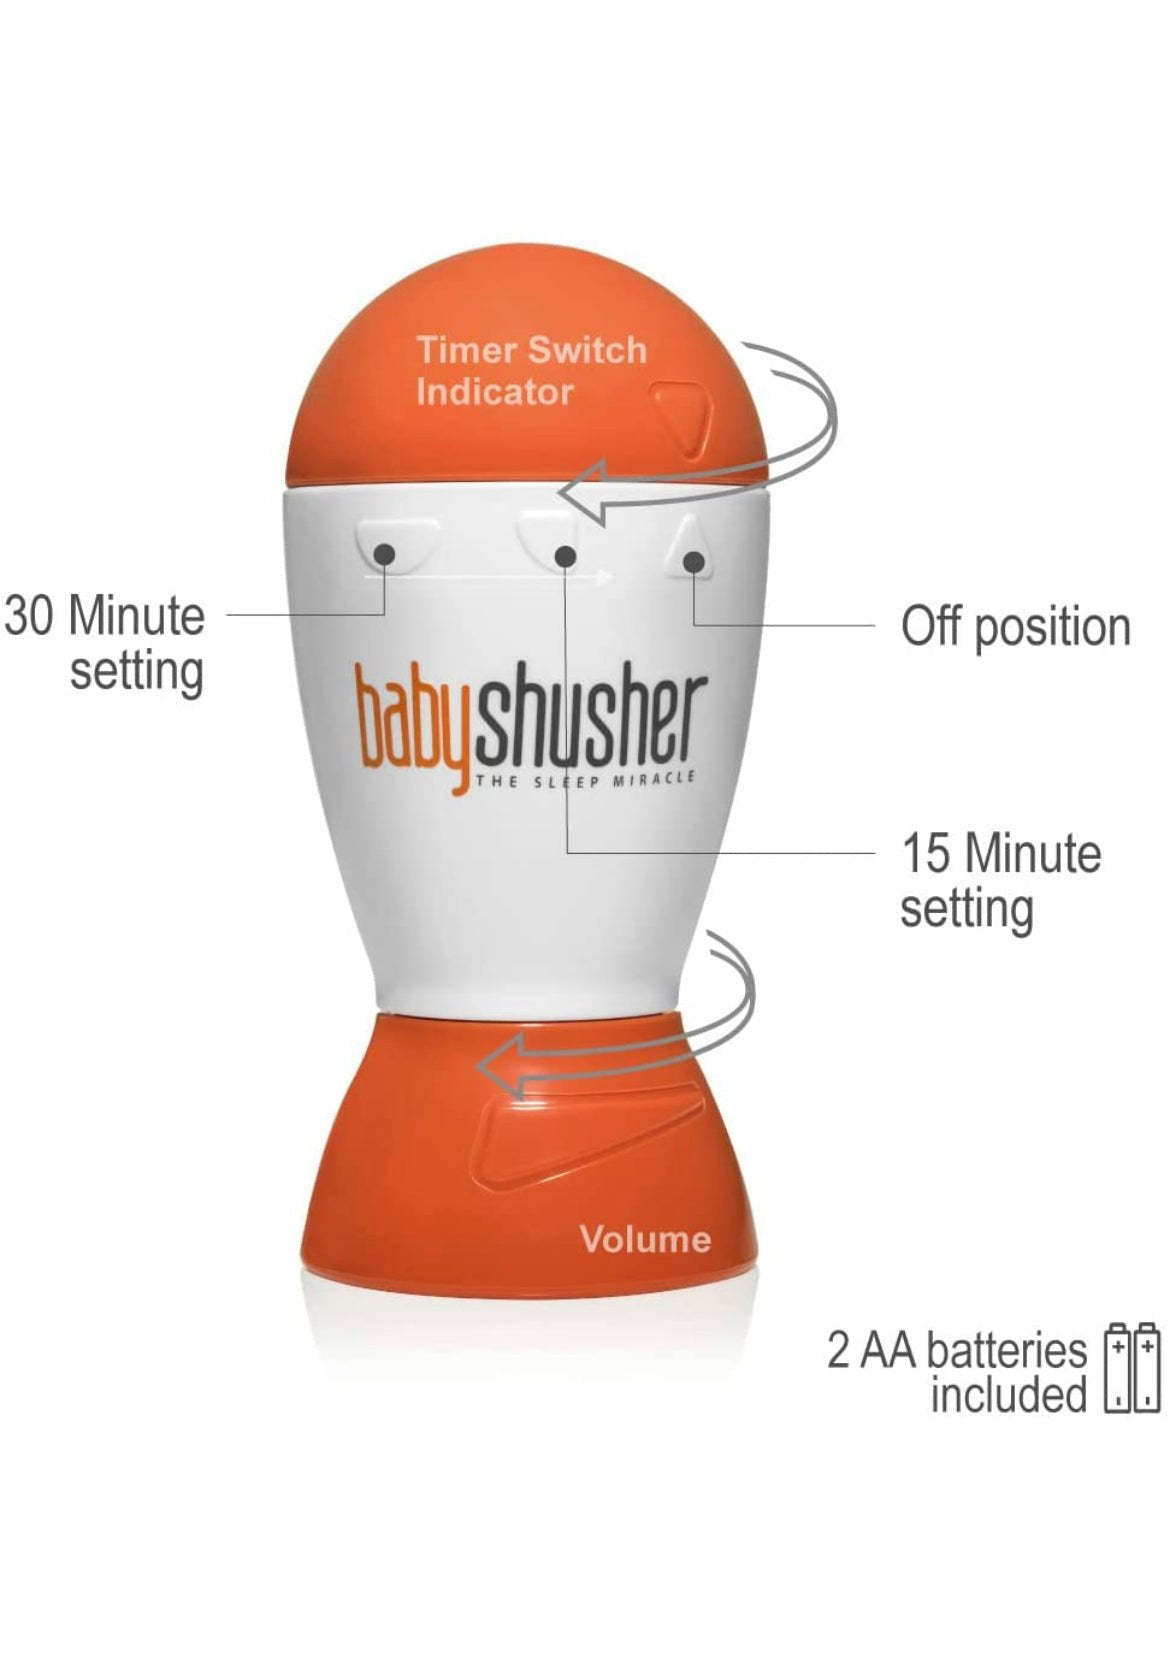 Baby Shusher The Sleep Miracle – Sound Machine – Rhythmic Human Voice Shushes Baby to Sleep Every Time – The Quickest Way to Get Baby to Sleep - Approved Rhythmic Shushing Technique.